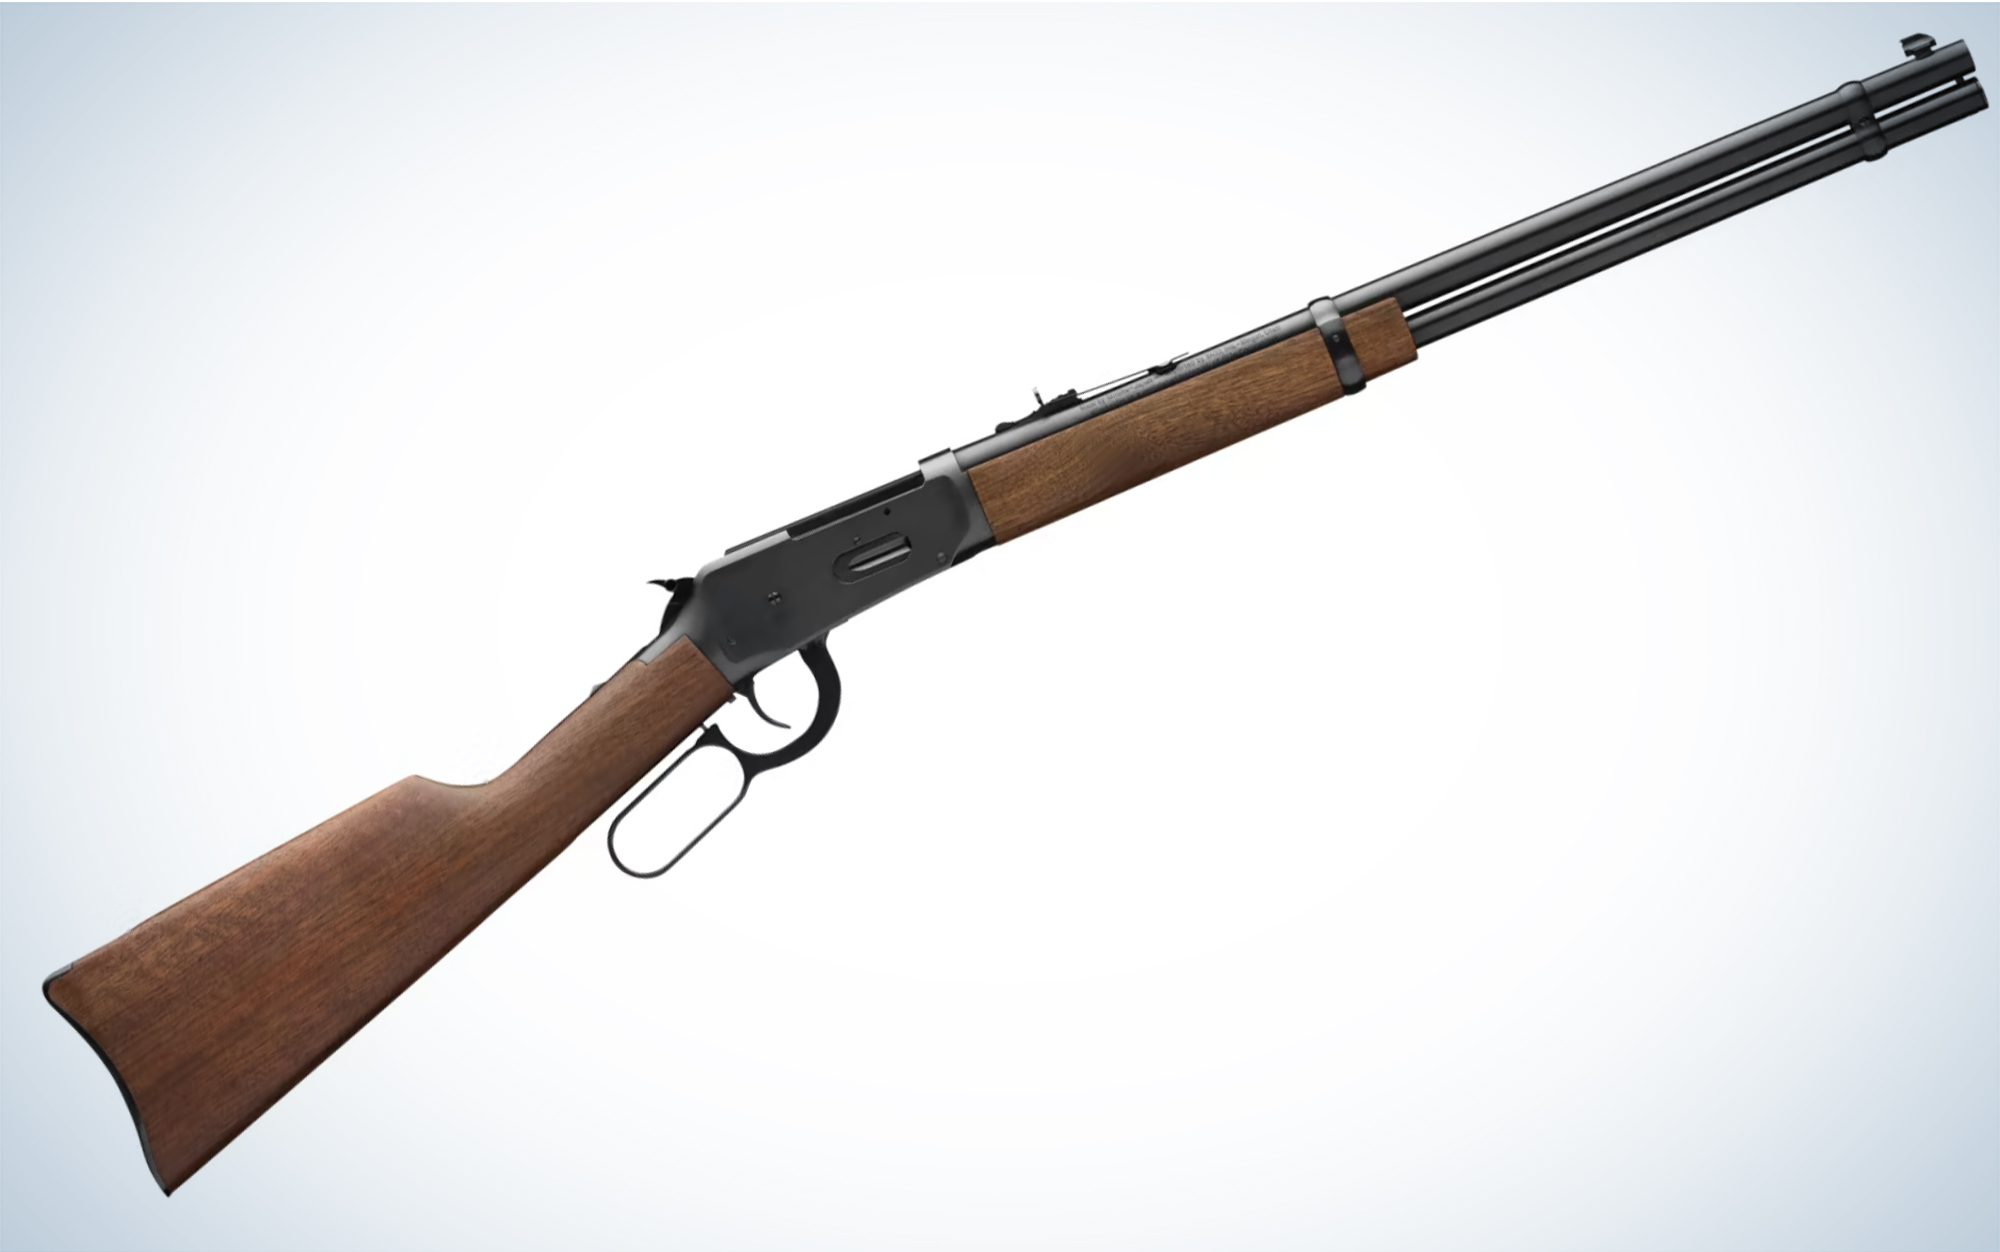 The Winchester 1984 is one of the best .30-30 lever actions.